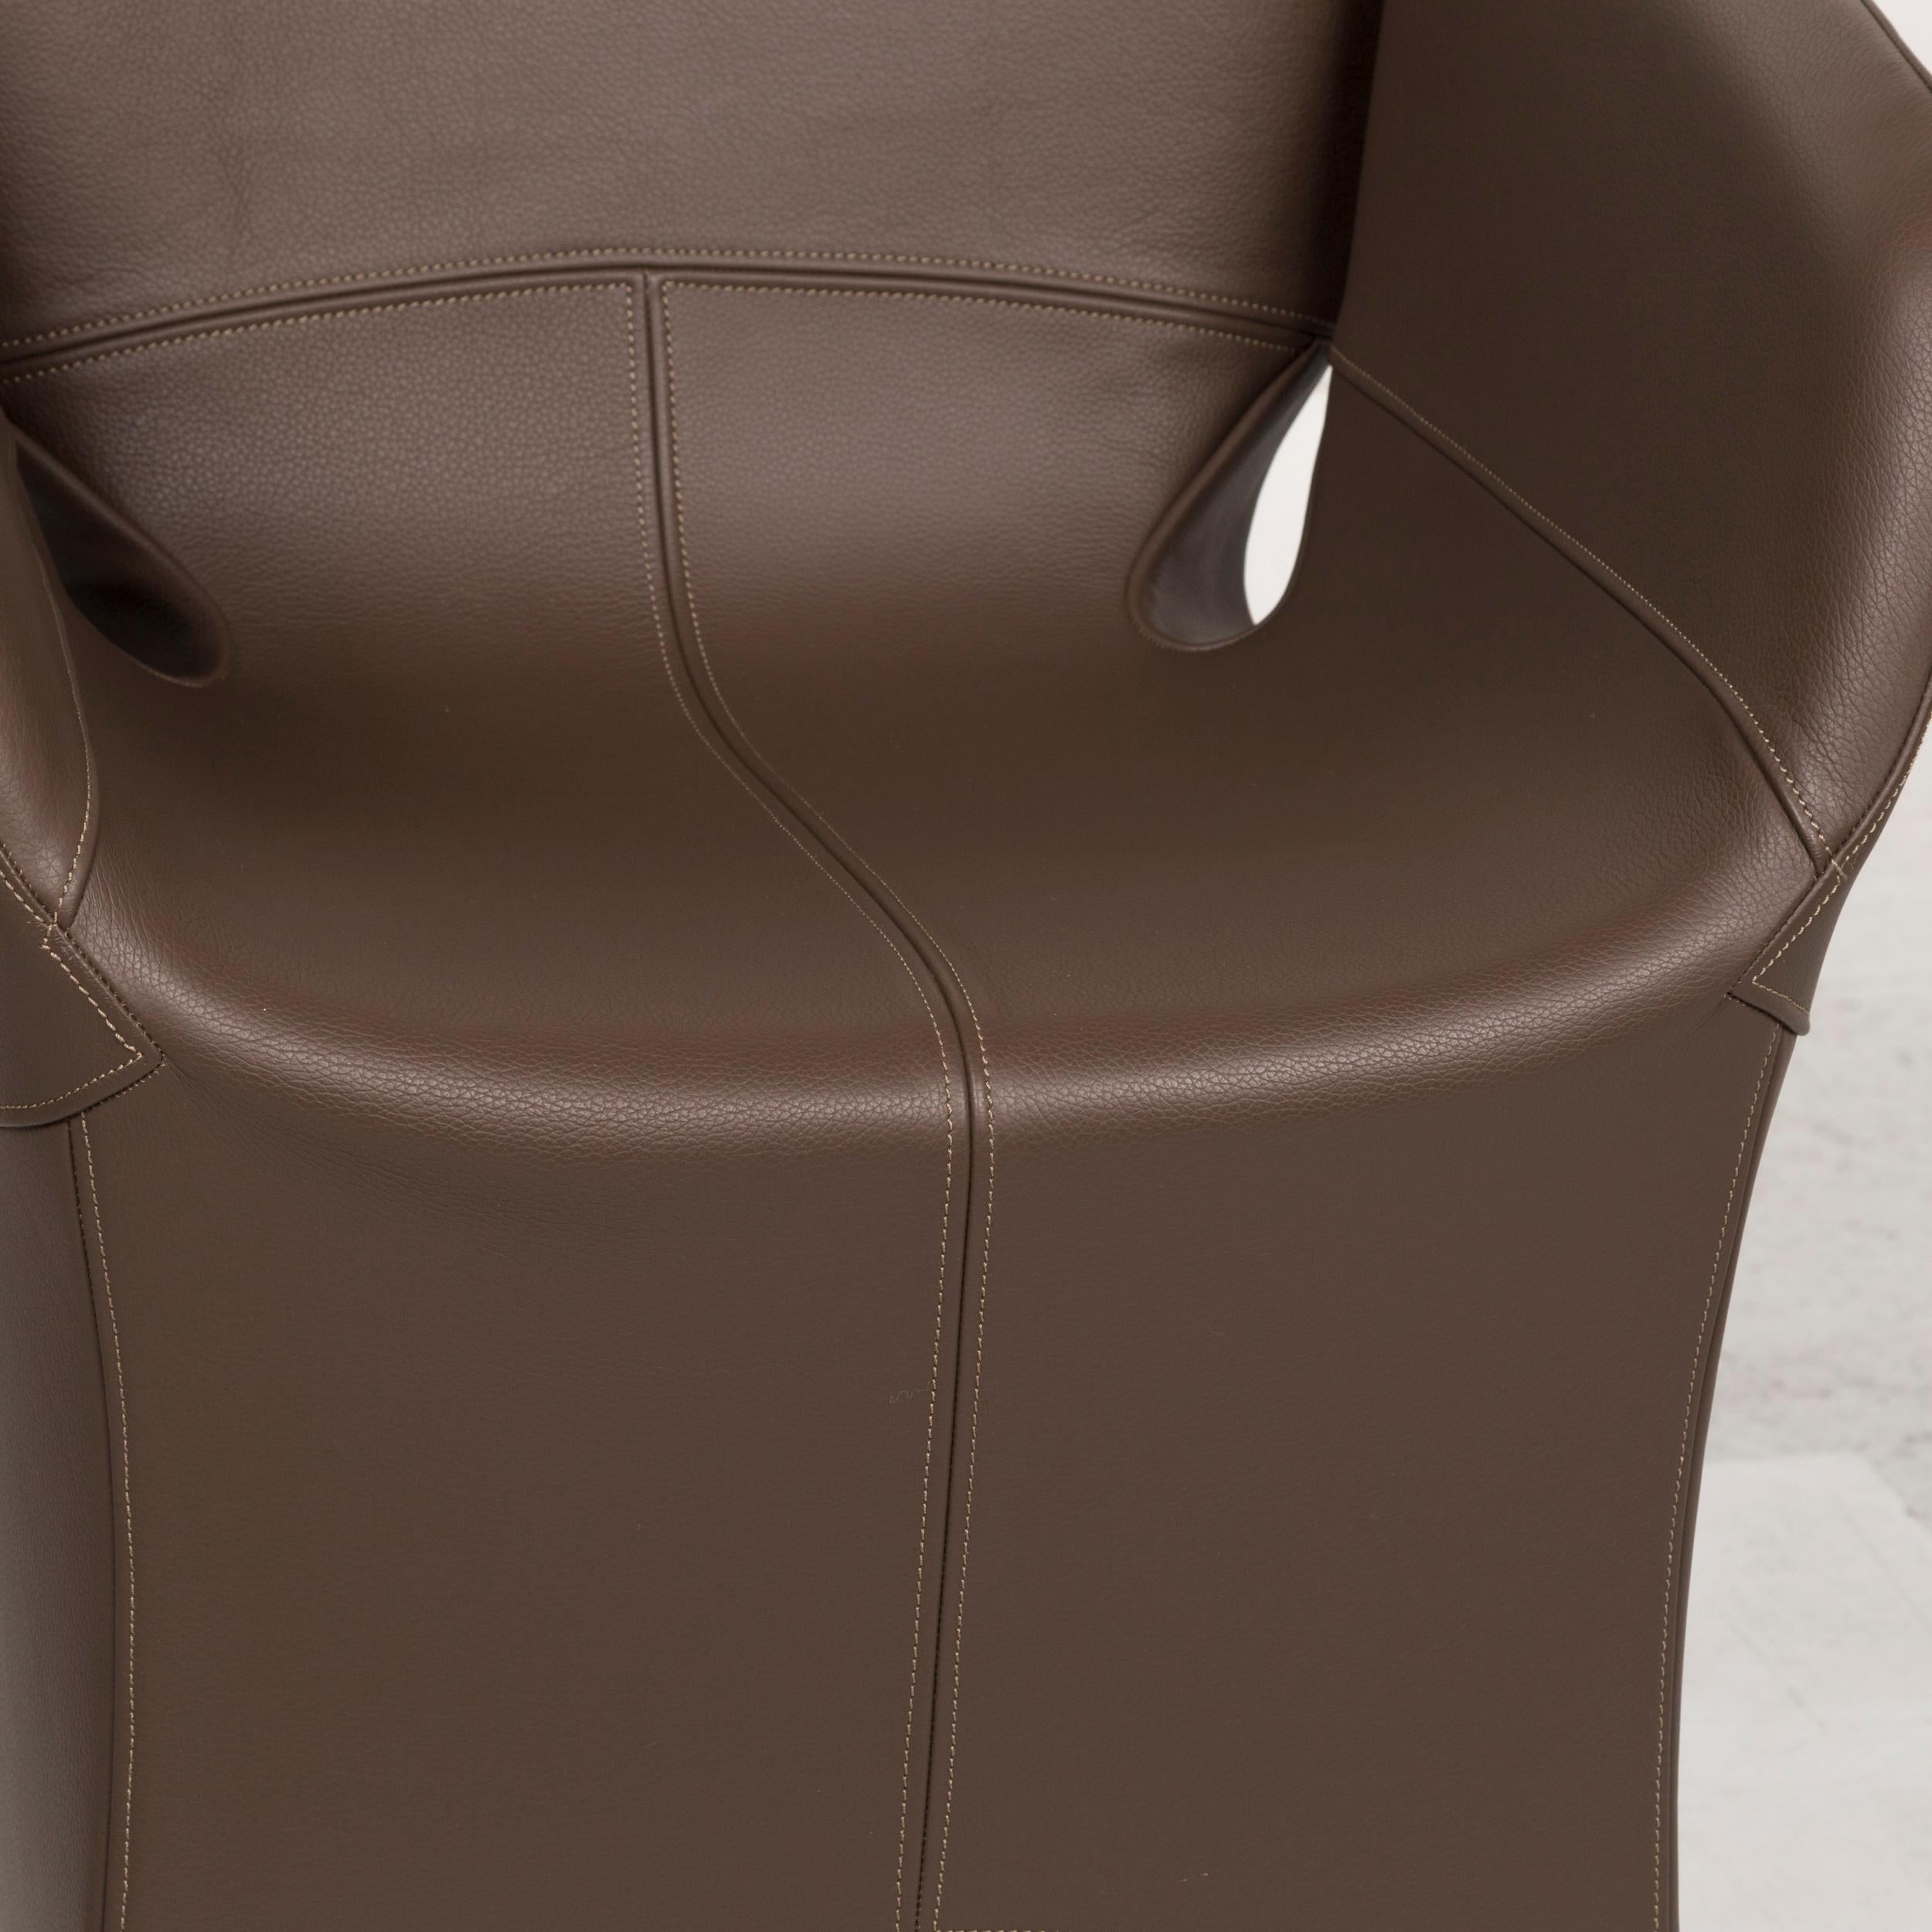 We present to you a Moroso Bloomy leather armchair brown.


 Product measurements in centimeters:
 

Depth 55
Width 56
Height 75
Seat height 46
Rest height 70
Seat depth 40
Seat width 40
Back height 30.

 